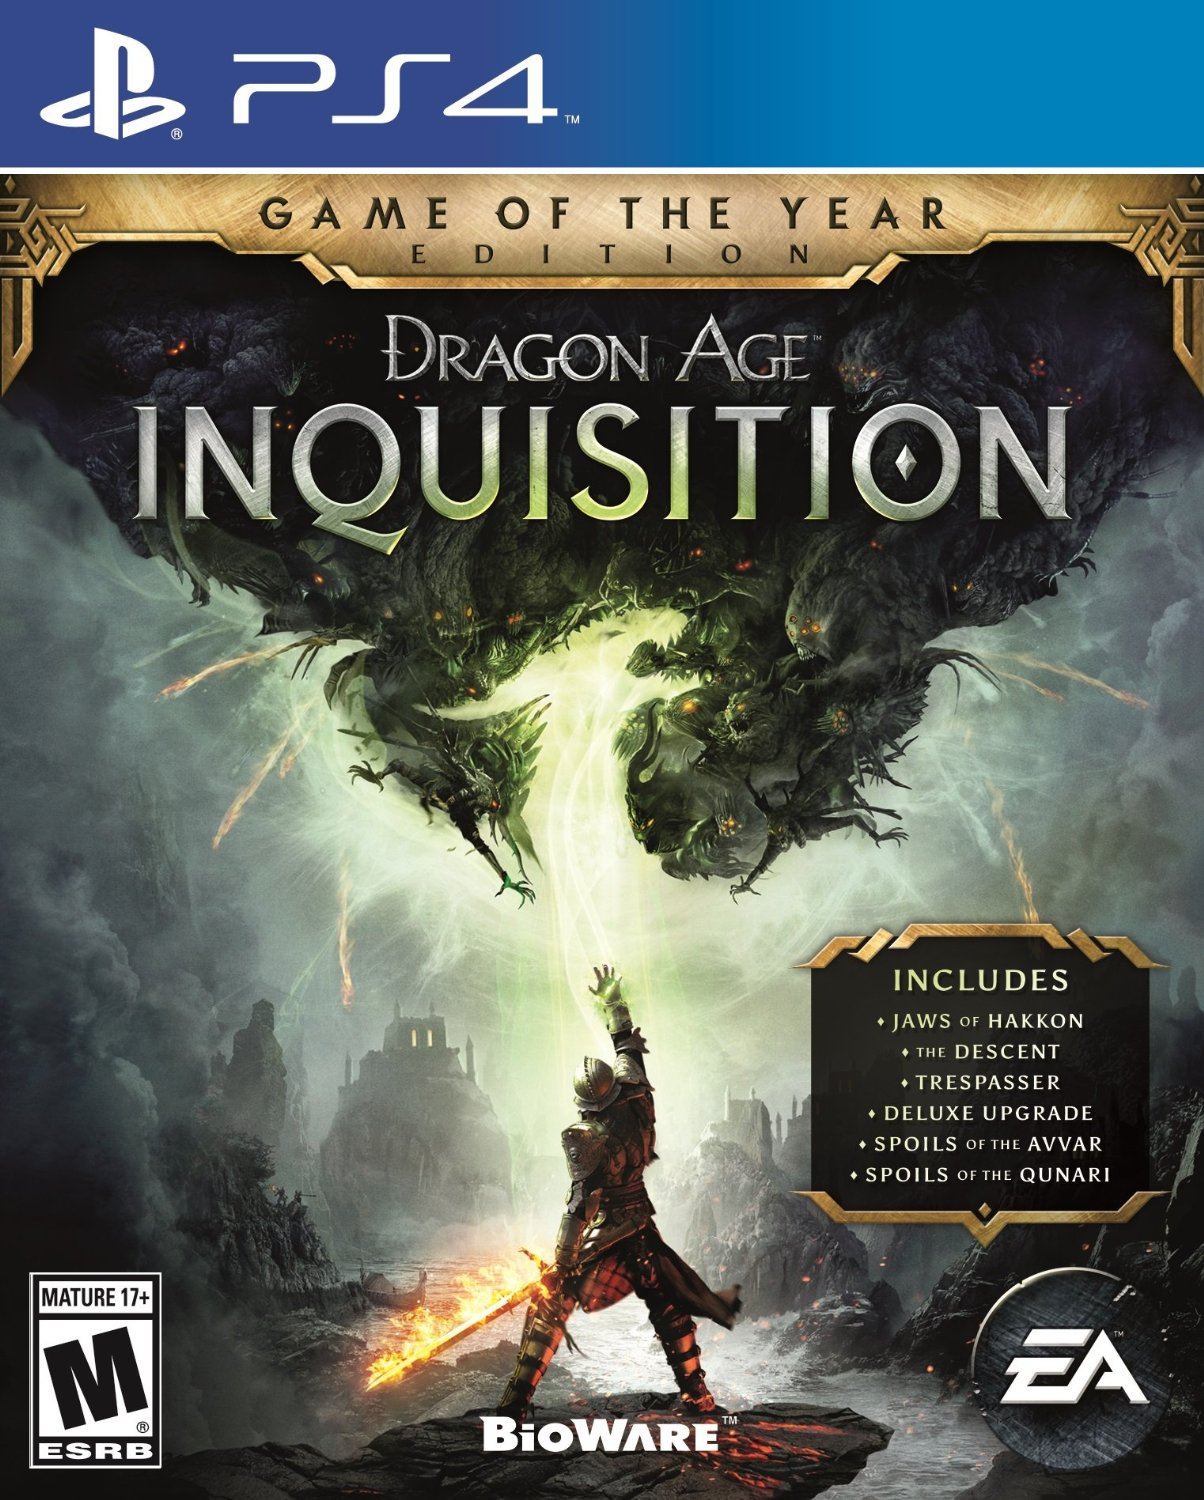 Dragon age inquisition review metacritic